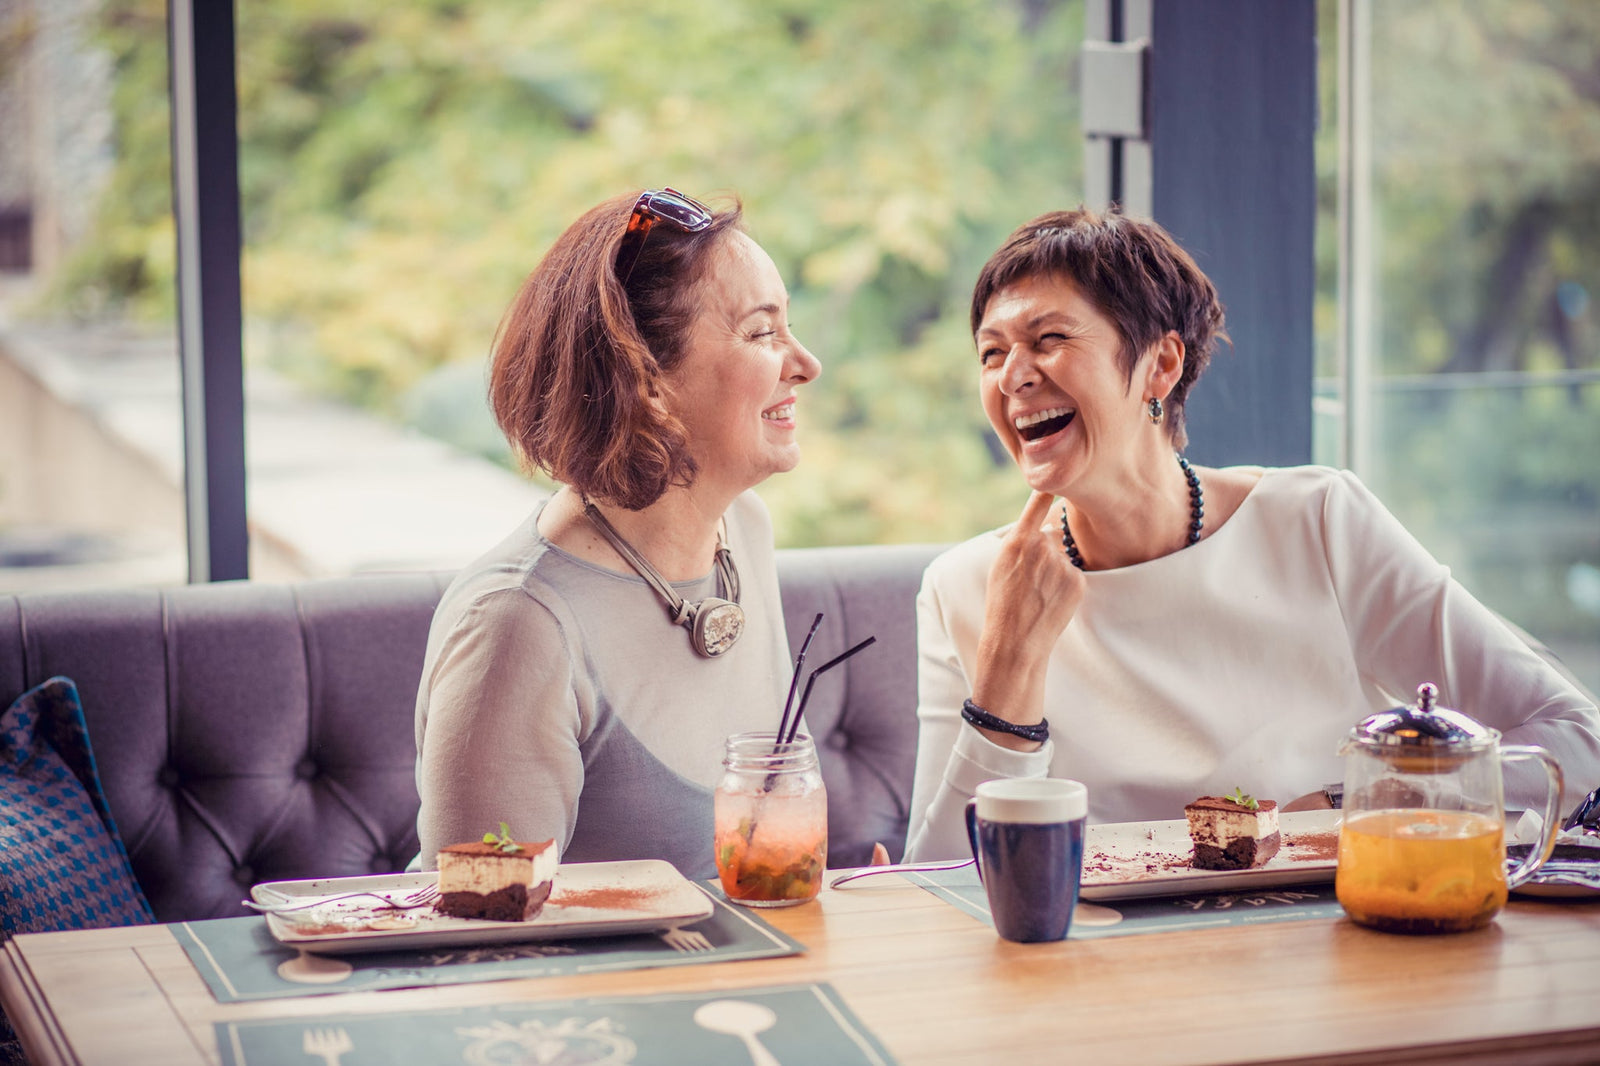 Two women chatting in a cafe while smiling